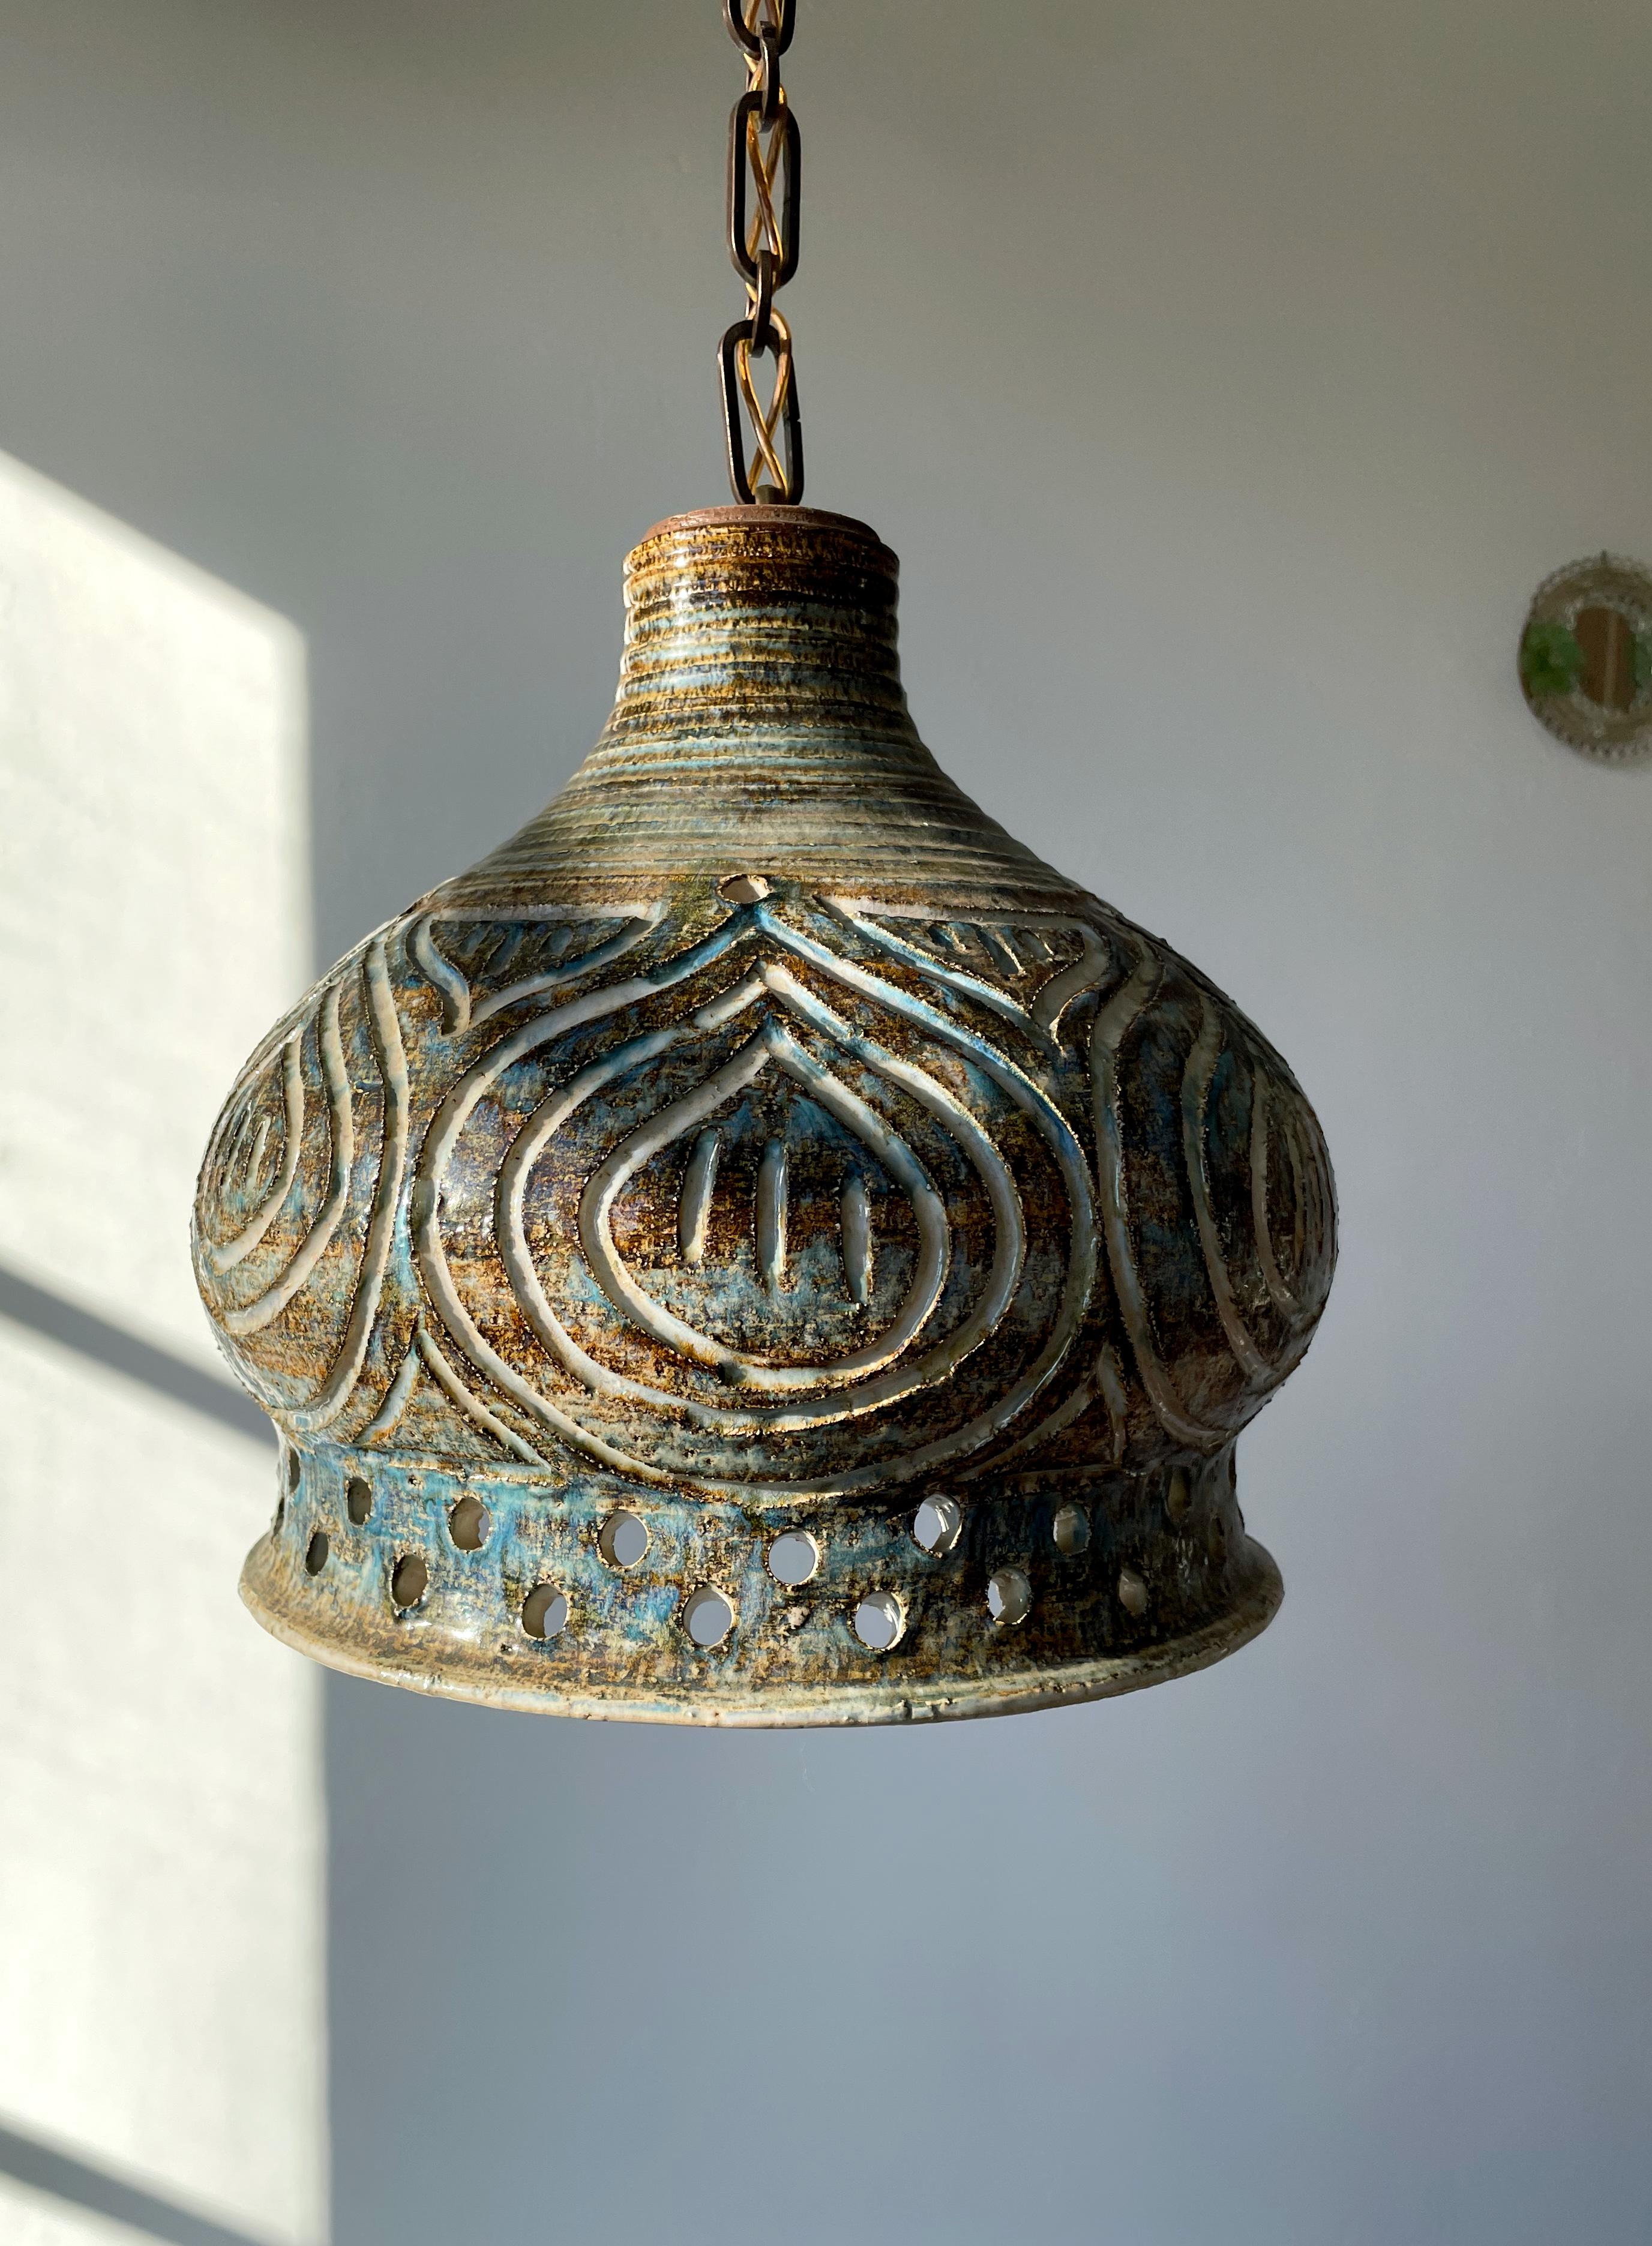 Unique handmade ceramic pendant with hand-carved incised organic decorations. Bell shaped body with perforations on the lower and top part for the light to shine through. Glazed with sand, cream, light blue and brown colors. Adjustable 1 m long